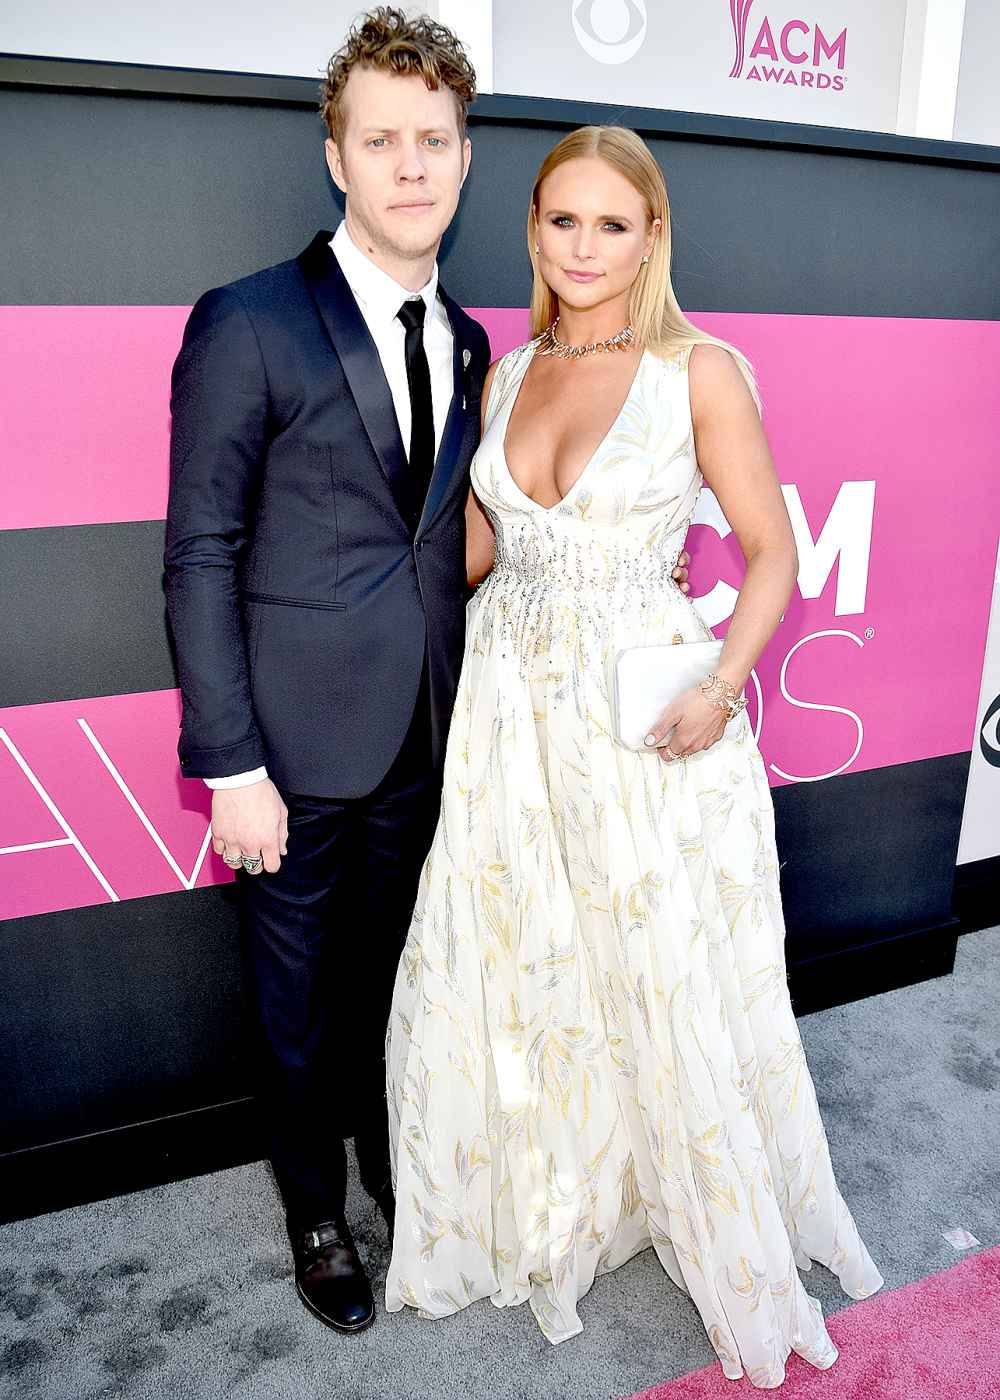 Anderson East and Miranda Lambert attend the 52nd Academy of Country Music Awards at Toshiba Plaza on April 2, 2017 in Las Vegas, Nevada.